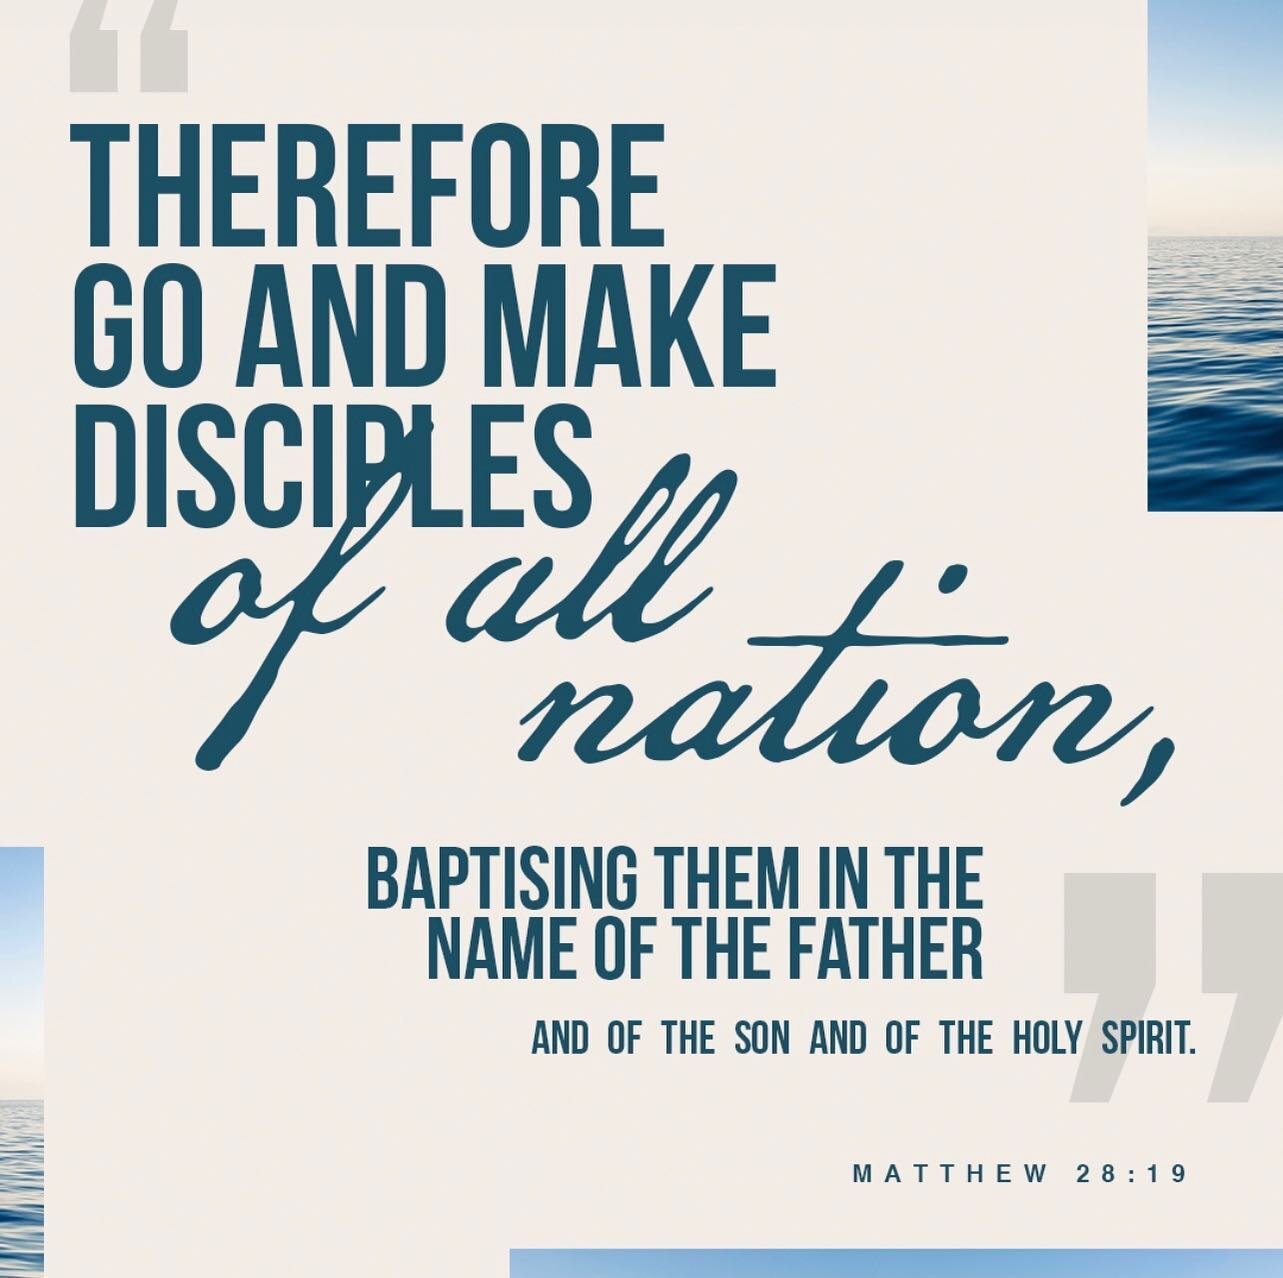 Baptism is a choice to express an outward confession of an inward decision to follow Christ. This Sunday, is our Baptism service and we can not wait. If you&rsquo;re interested in getting baptized, head to the link in our bio to register today!